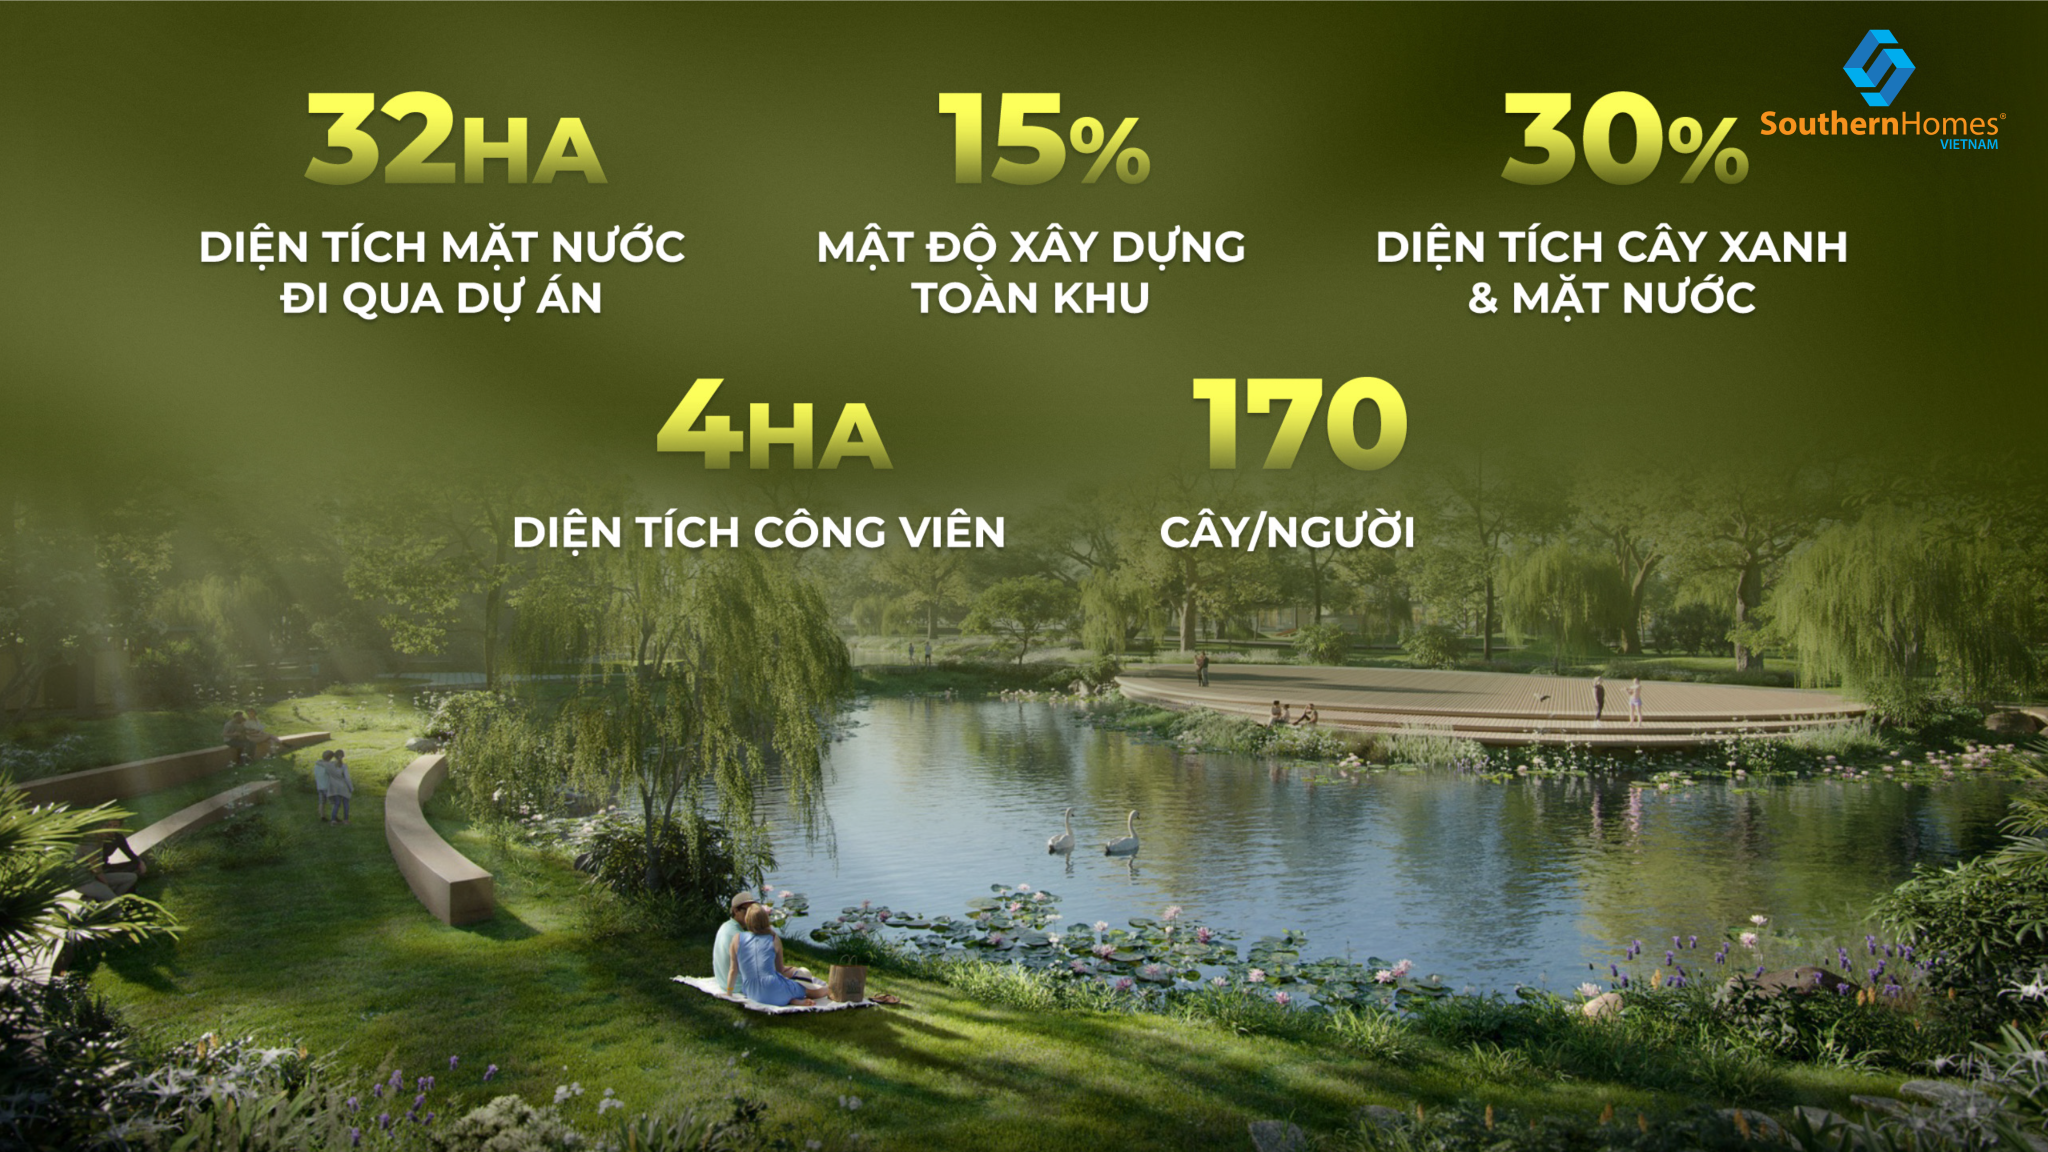 phoi-canh-du-a n-ecovillage-s ai-gon-rive17. png